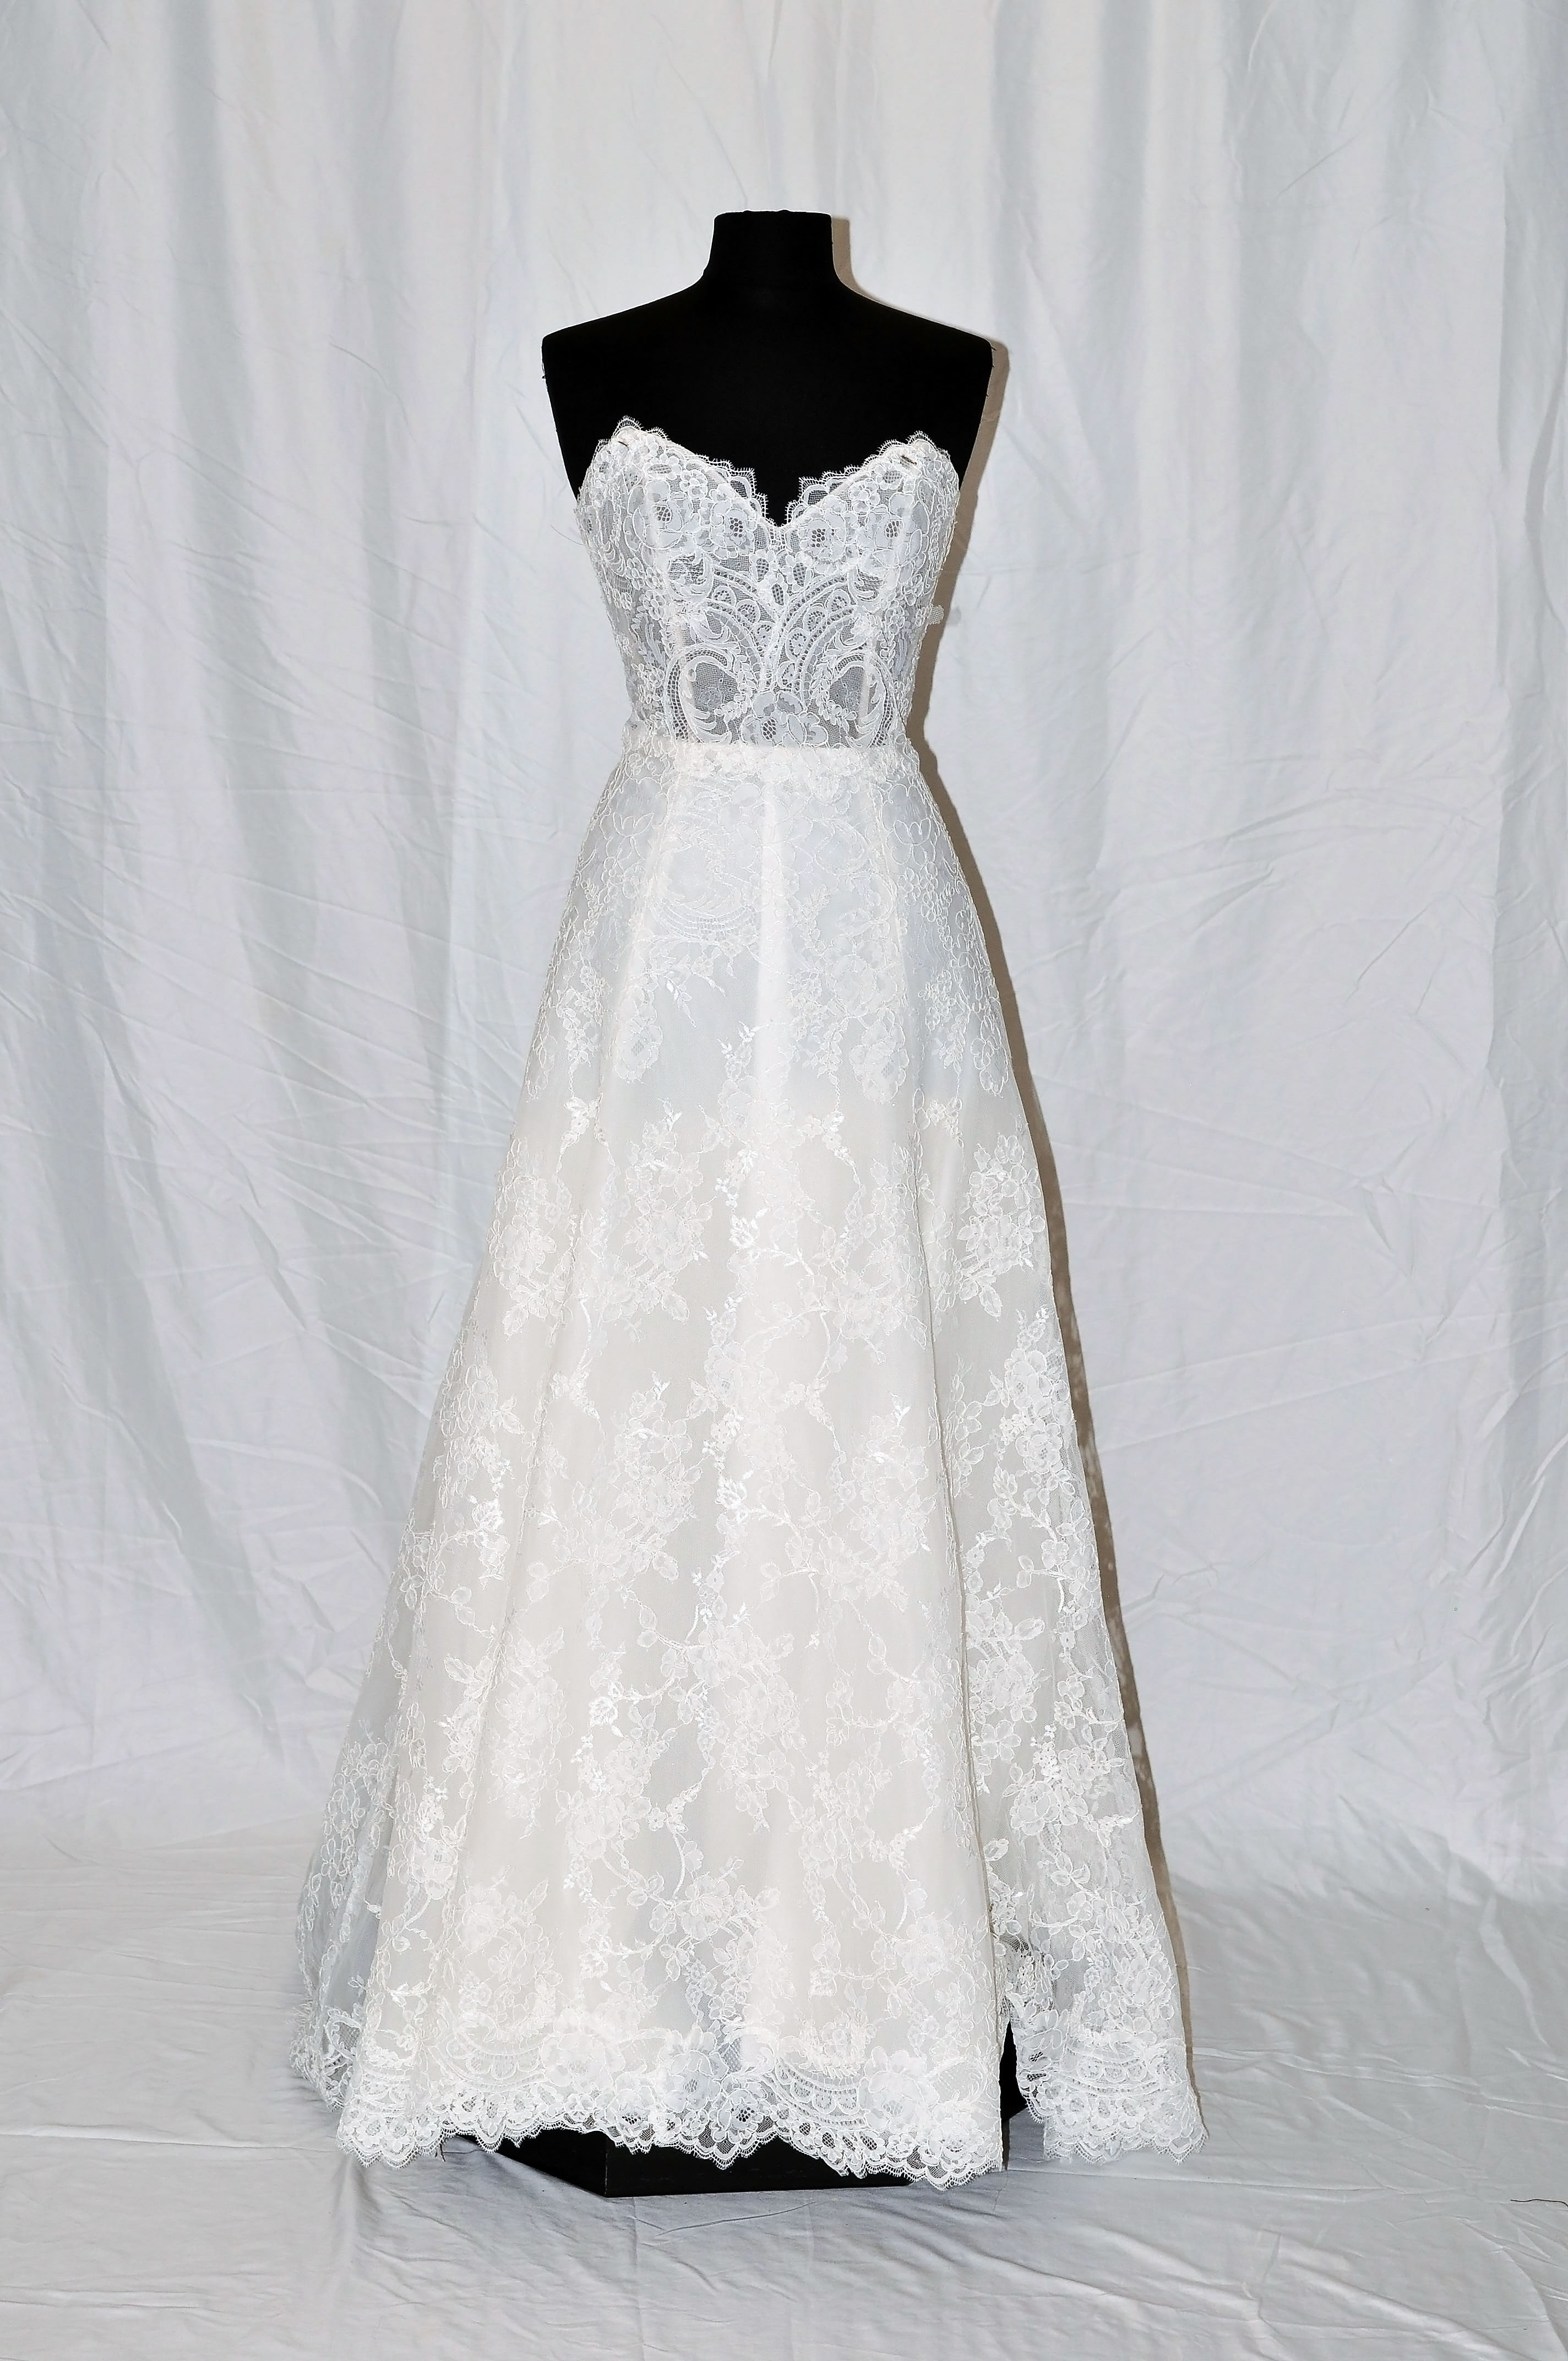 Re-embroidered lace strapless soft a-line gown with scalloped lace neckline and hem.